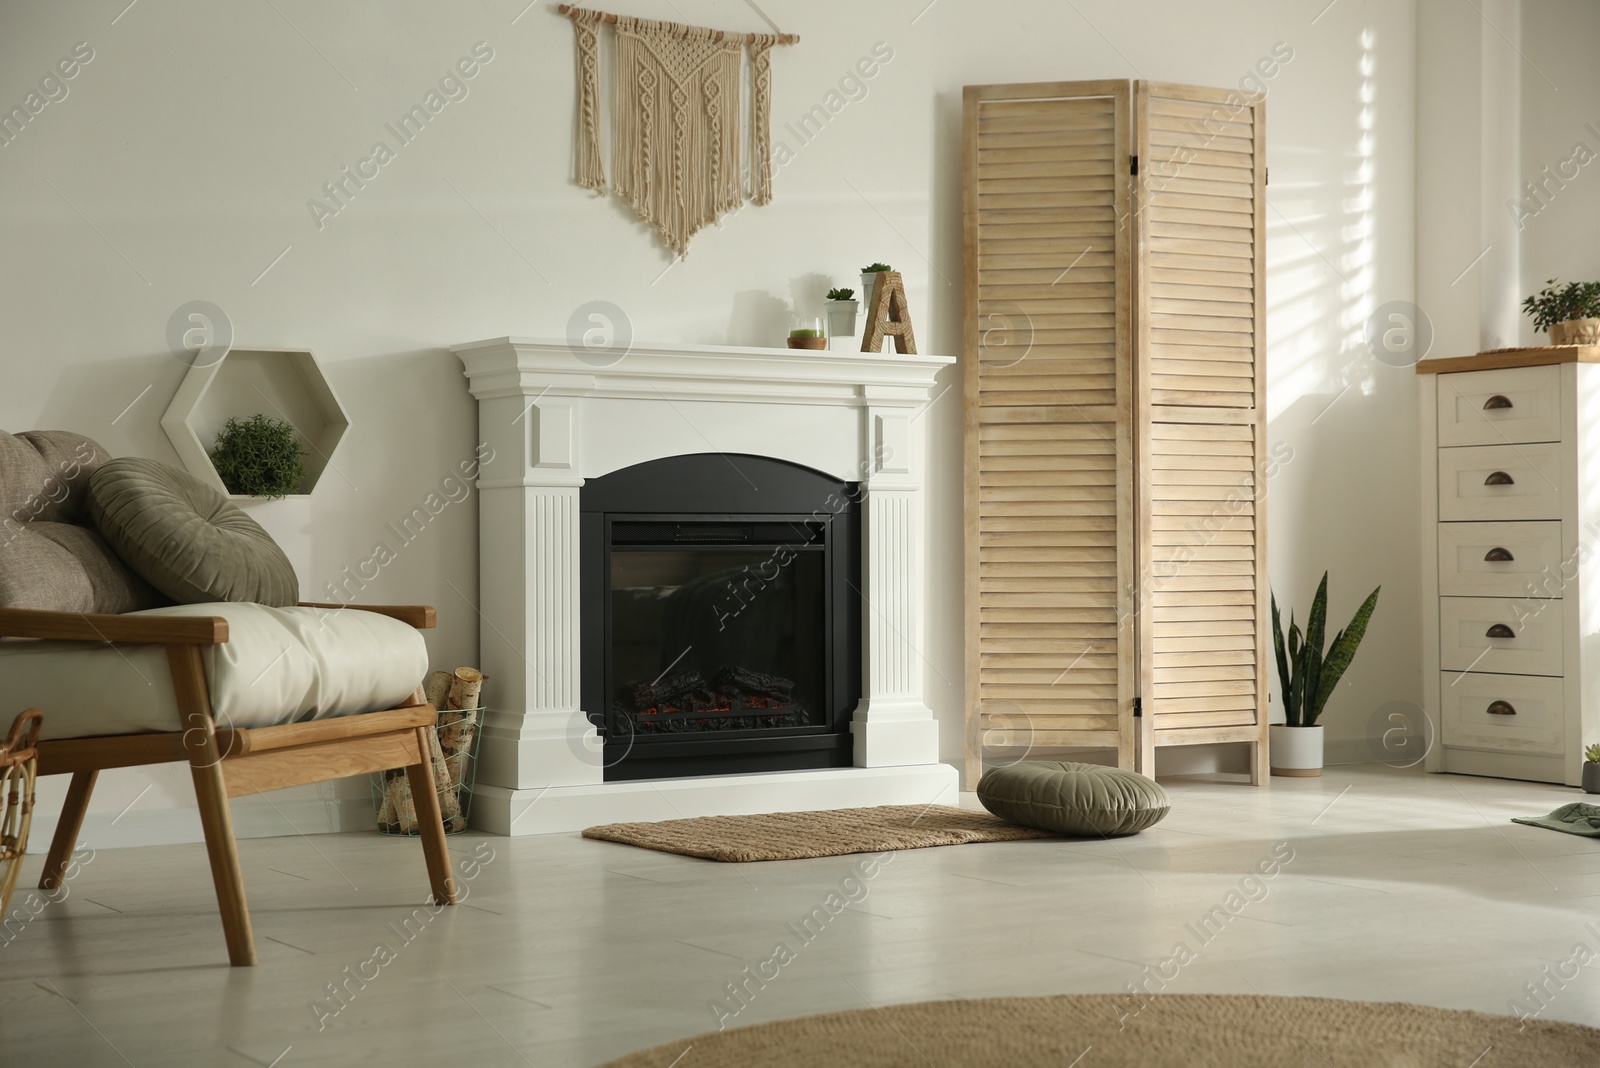 Photo of Bright living room interior with fireplace and basket of firewood